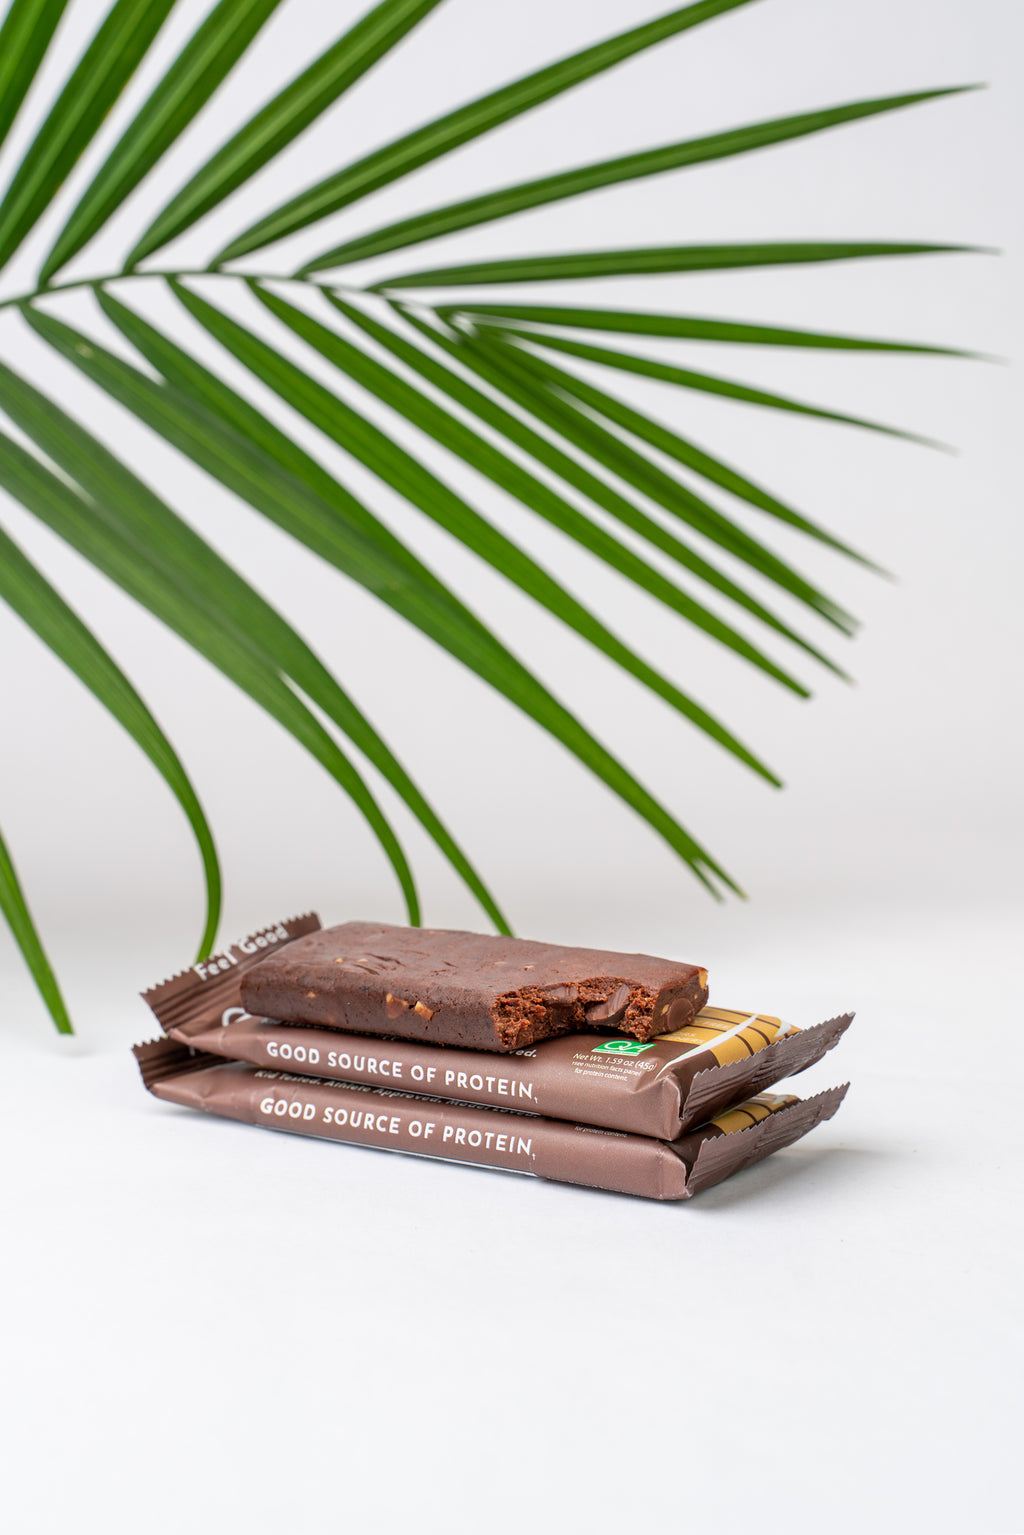 Premium protein bar. Vegan Chocolate Chip Protein Bar. Backed by advanced quality 3rd party testing. Crafted with clean ingredients and fresh beach vibes. Plant based protein bar. 